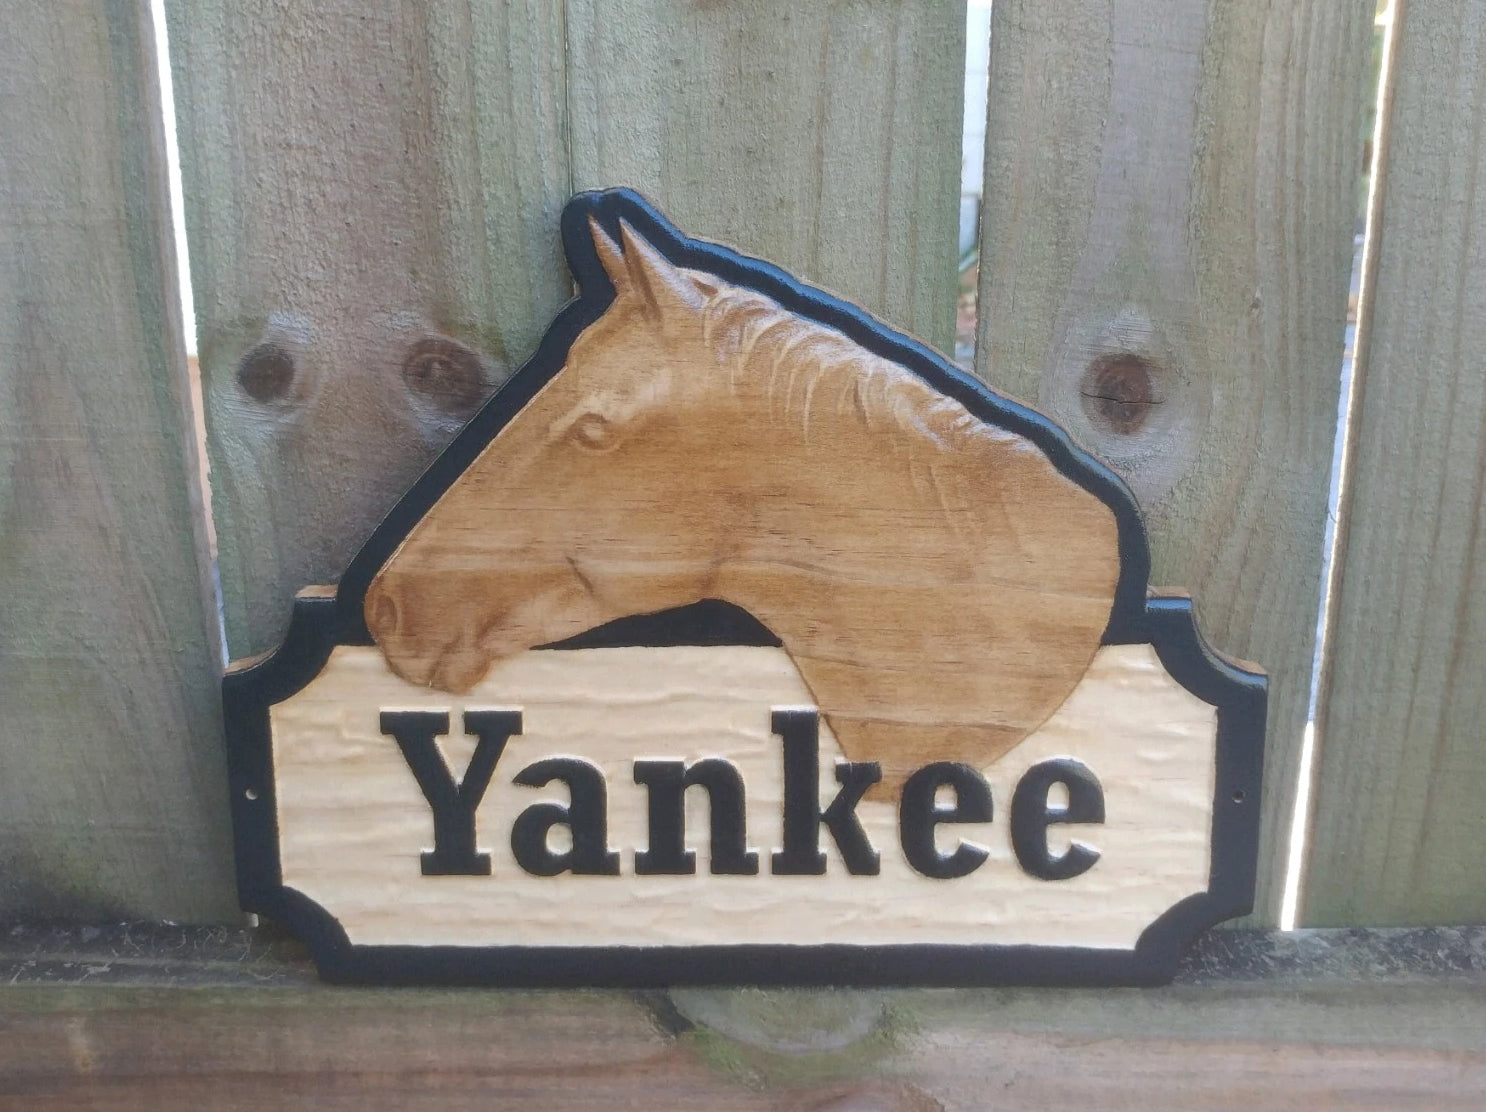 3D woodworking and high quality personalized horse stall signs to dress up that horse barn aisle.